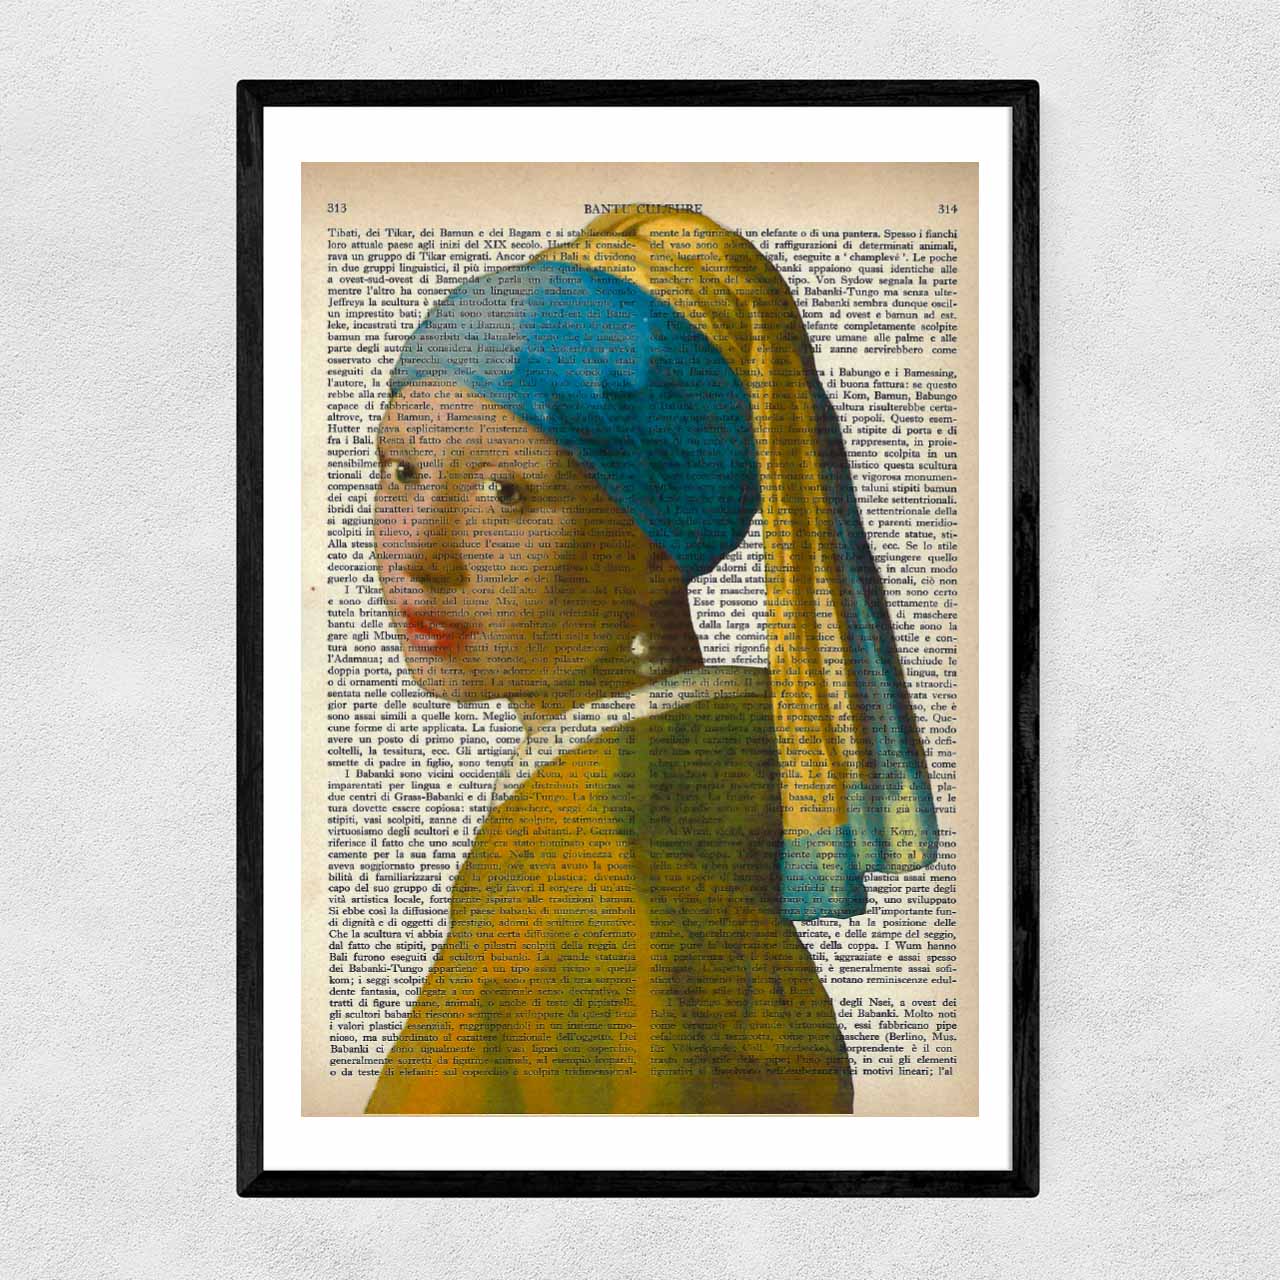 Mix-up: The Girl with a Pearl Earring - Vermeer